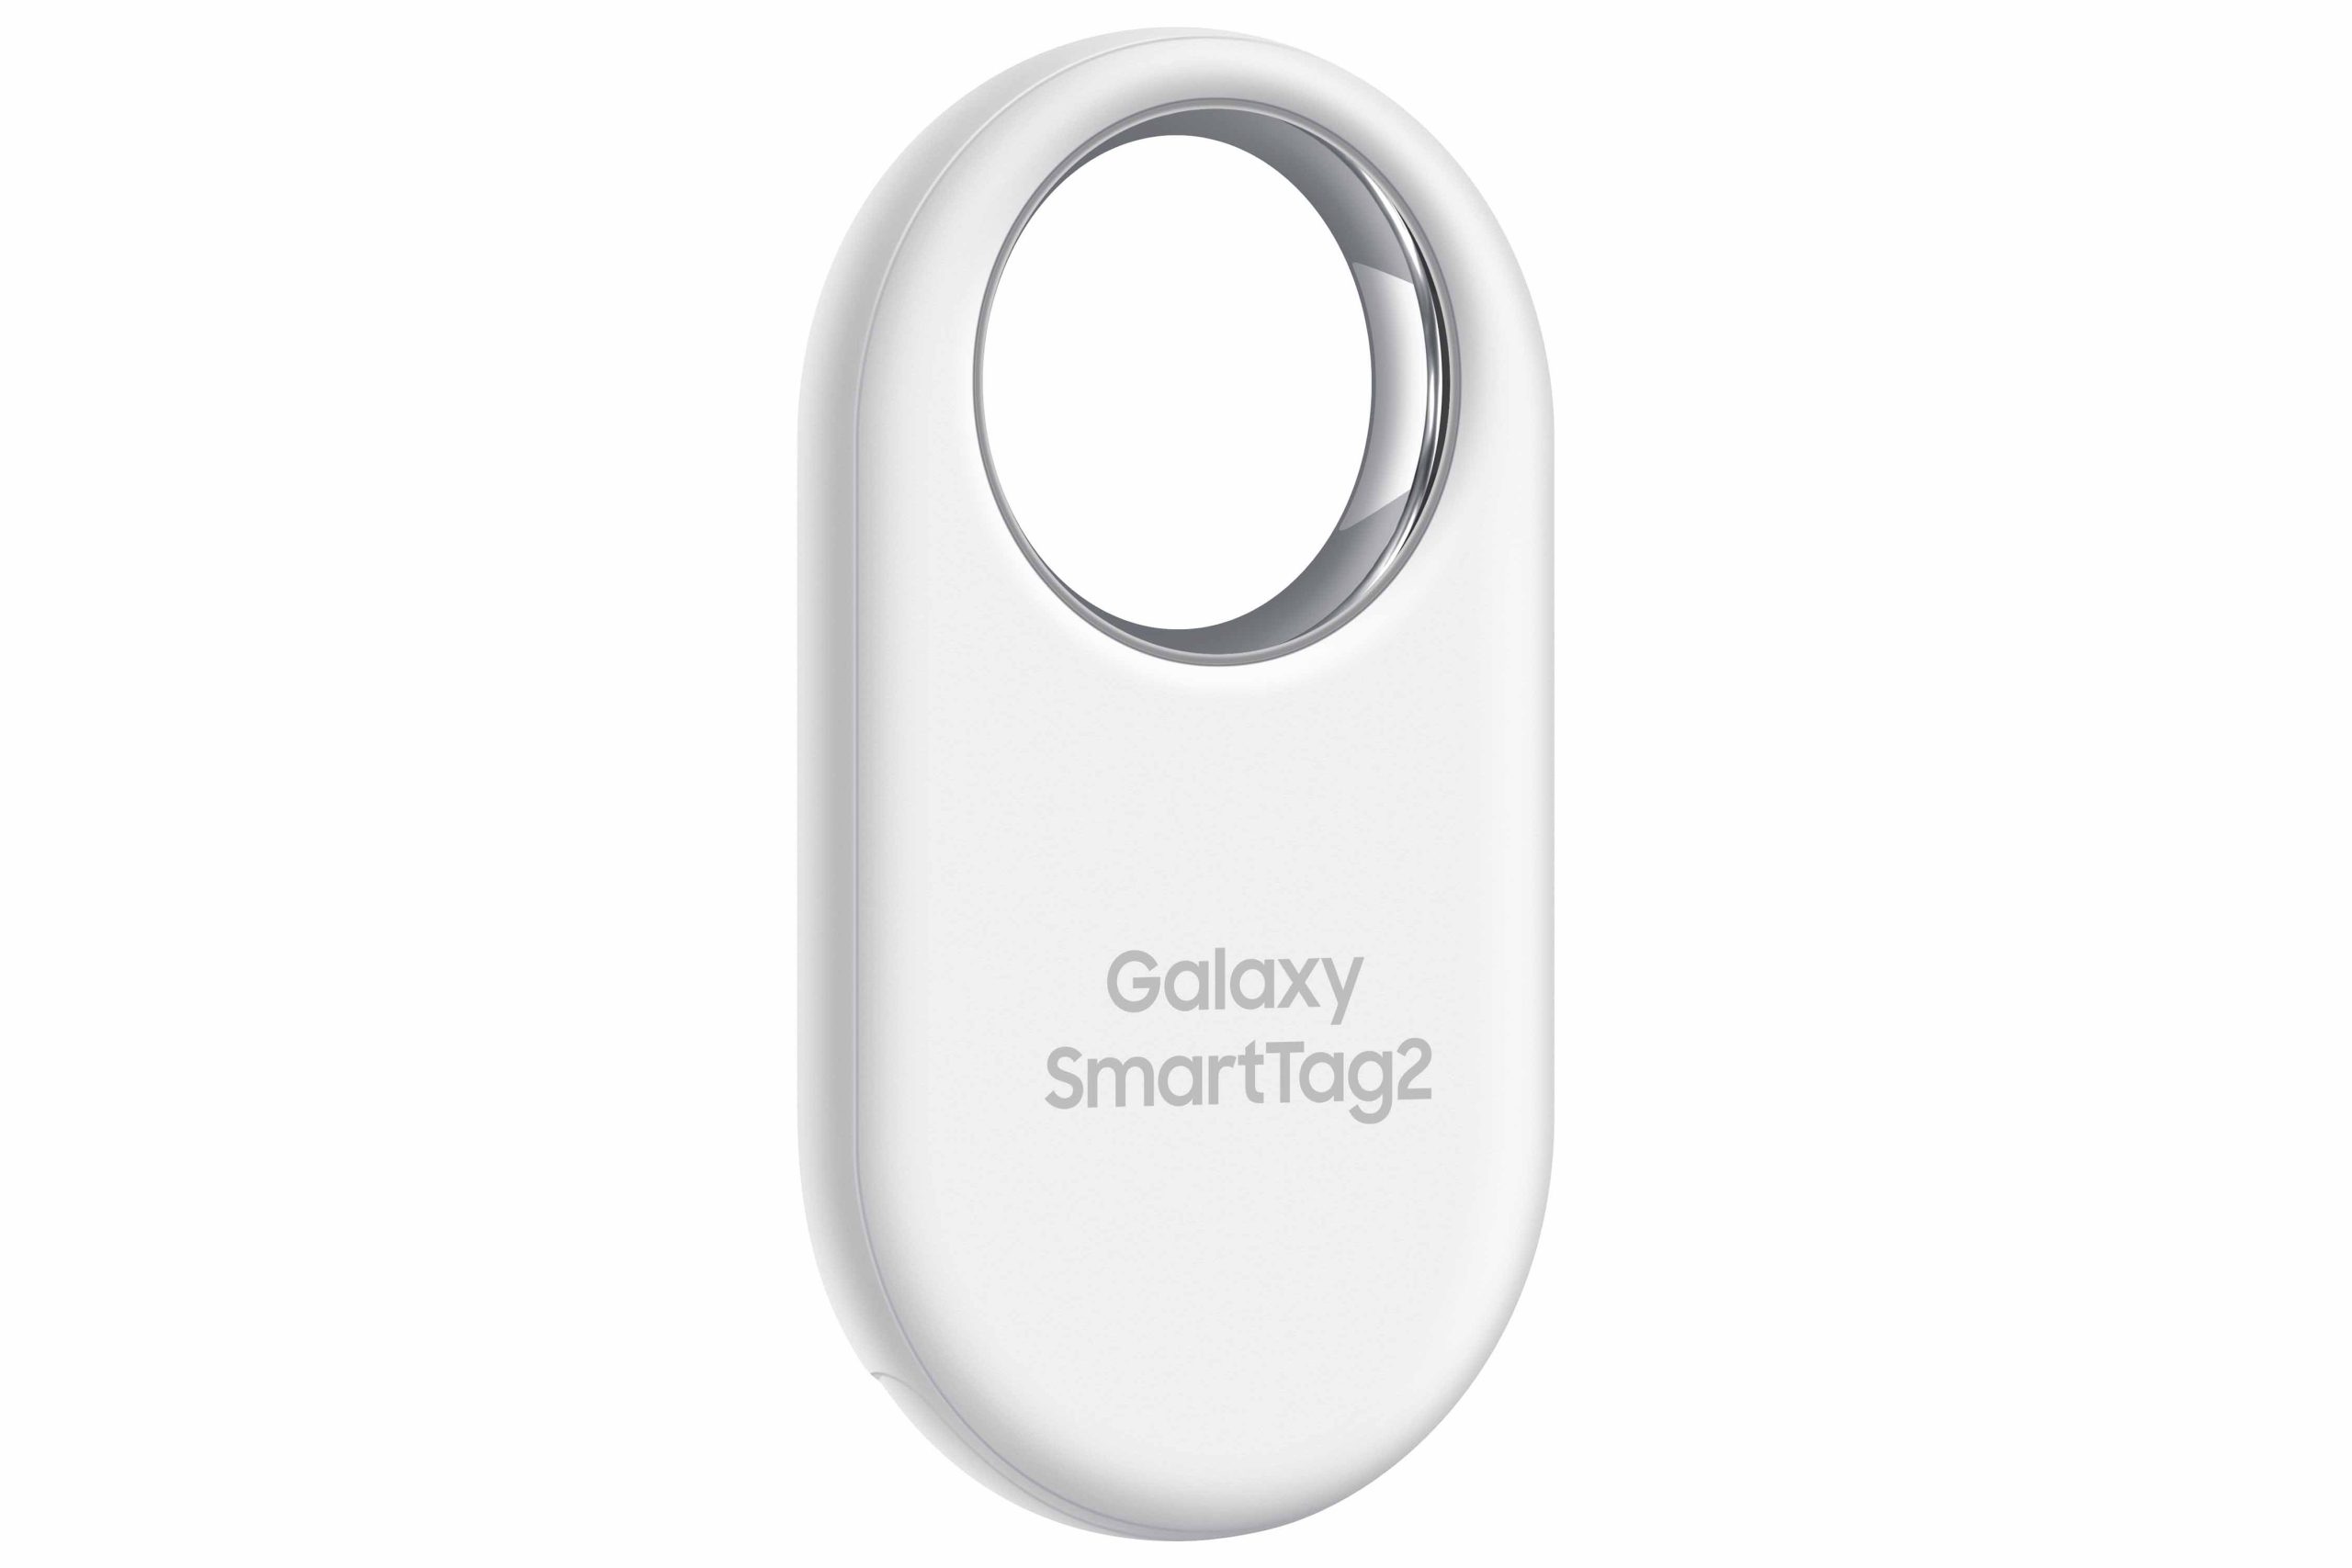 Samsung Galaxy Smart Tag 2 Features